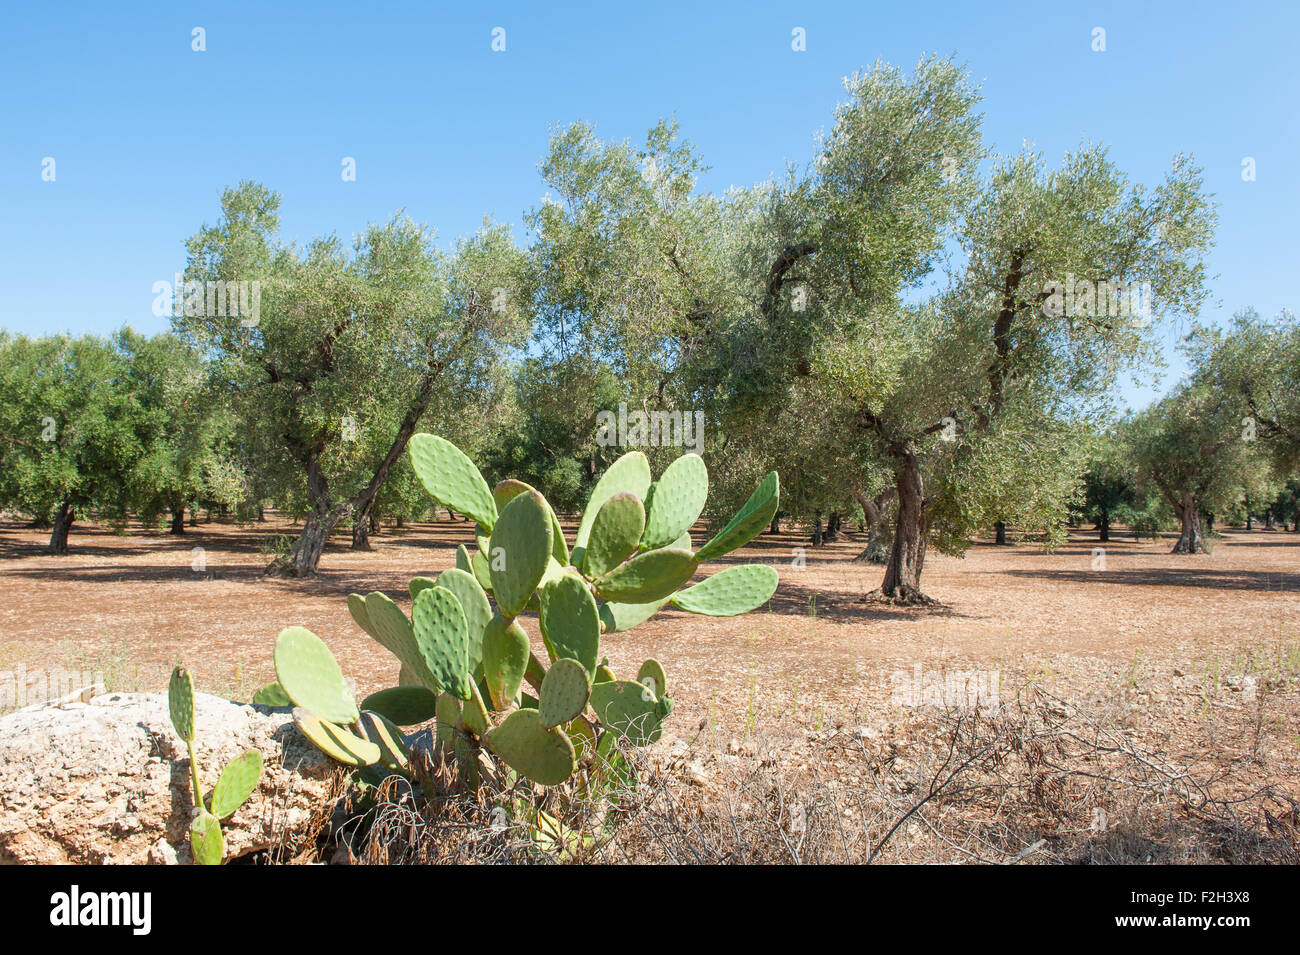 Prickly pear plant with olive trees field in background, sunny day Stock Photo